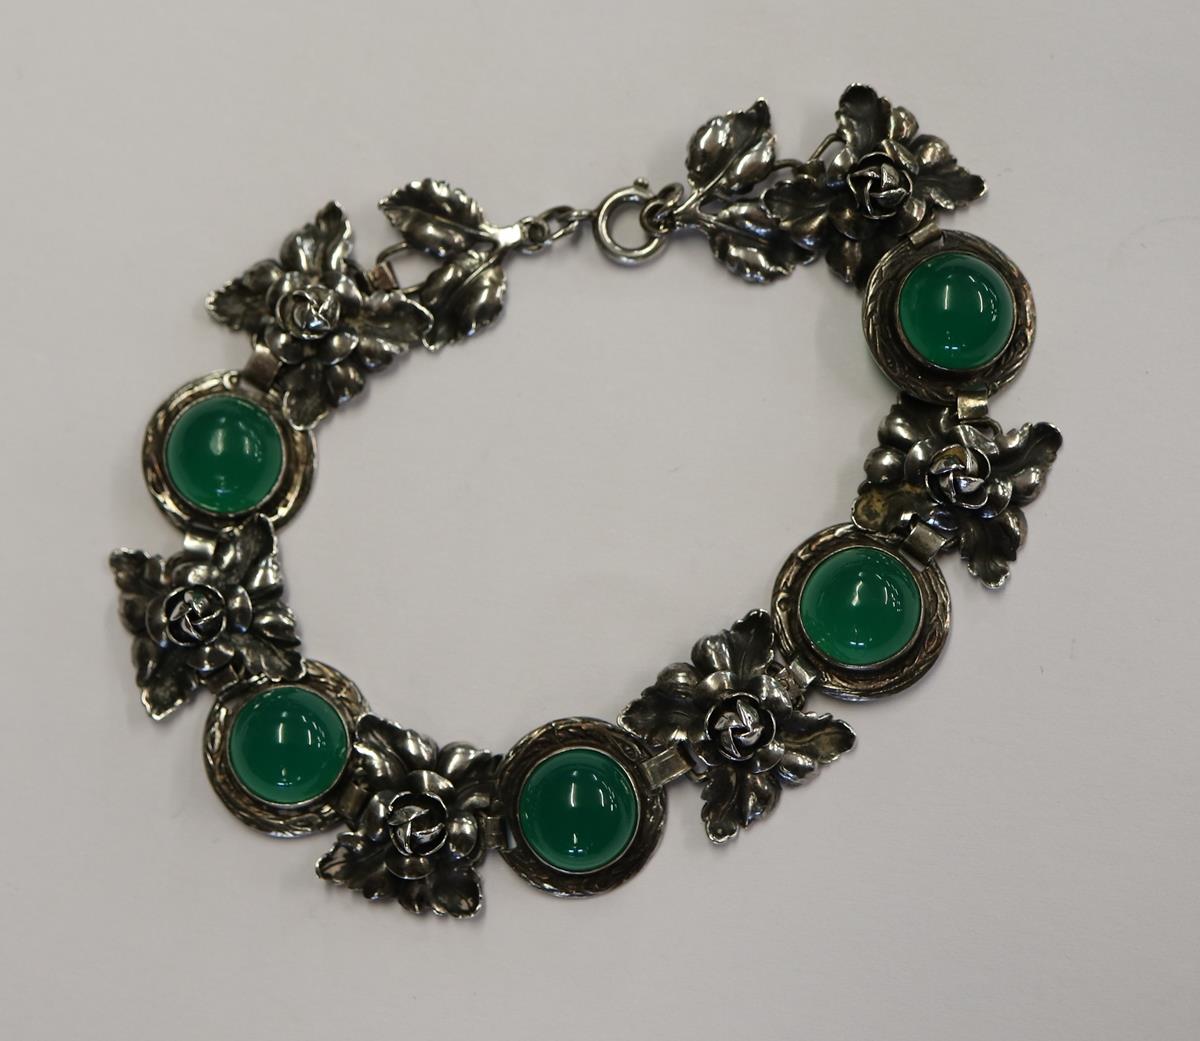 Green agate and silver bracelet